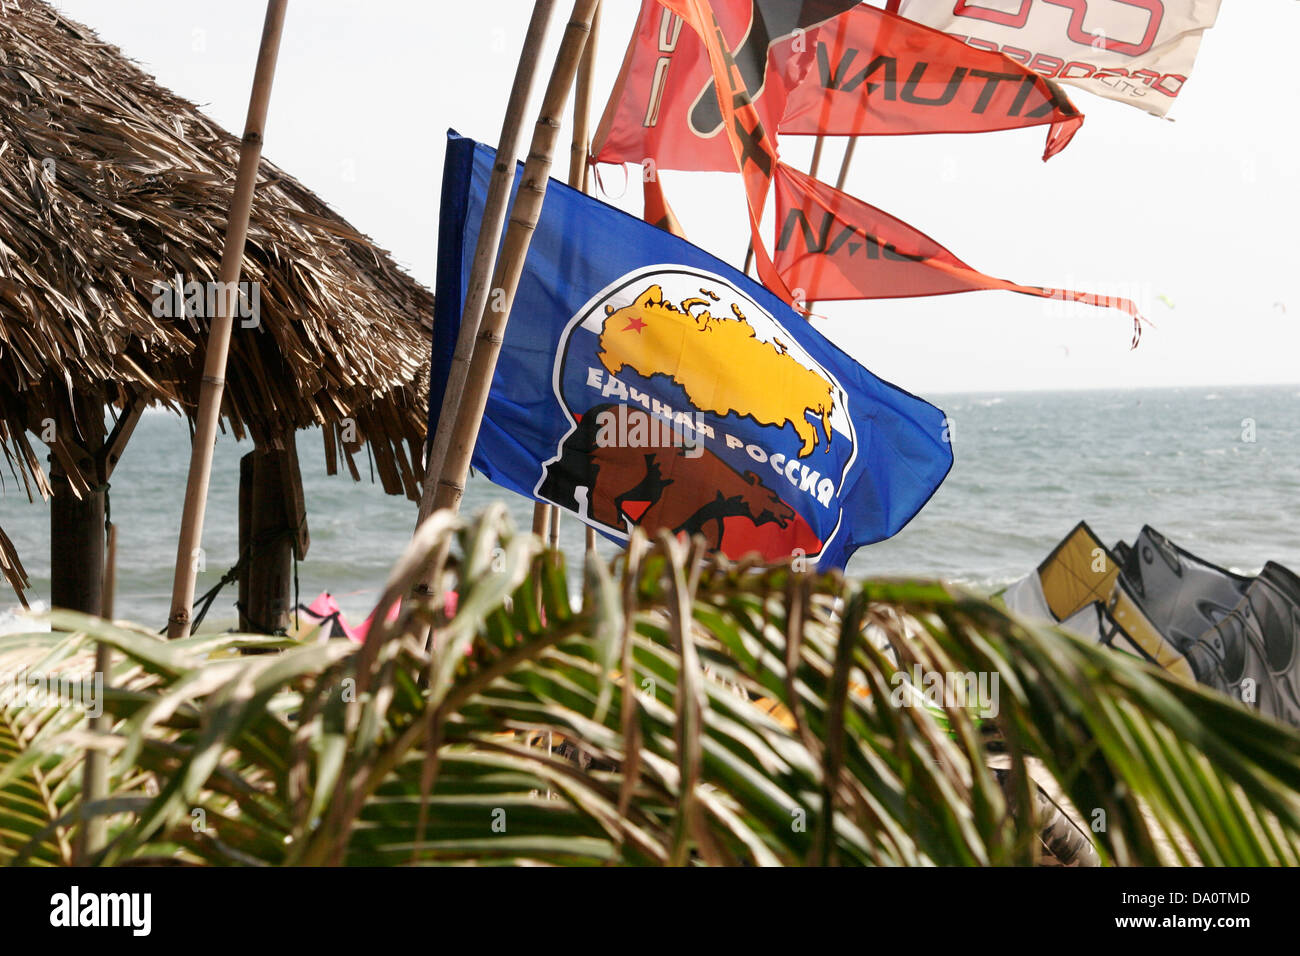 United Russia, Russia's ruling party flag  on the beach in Mui Ne, Vietnam, Southeast Asia Stock Photo